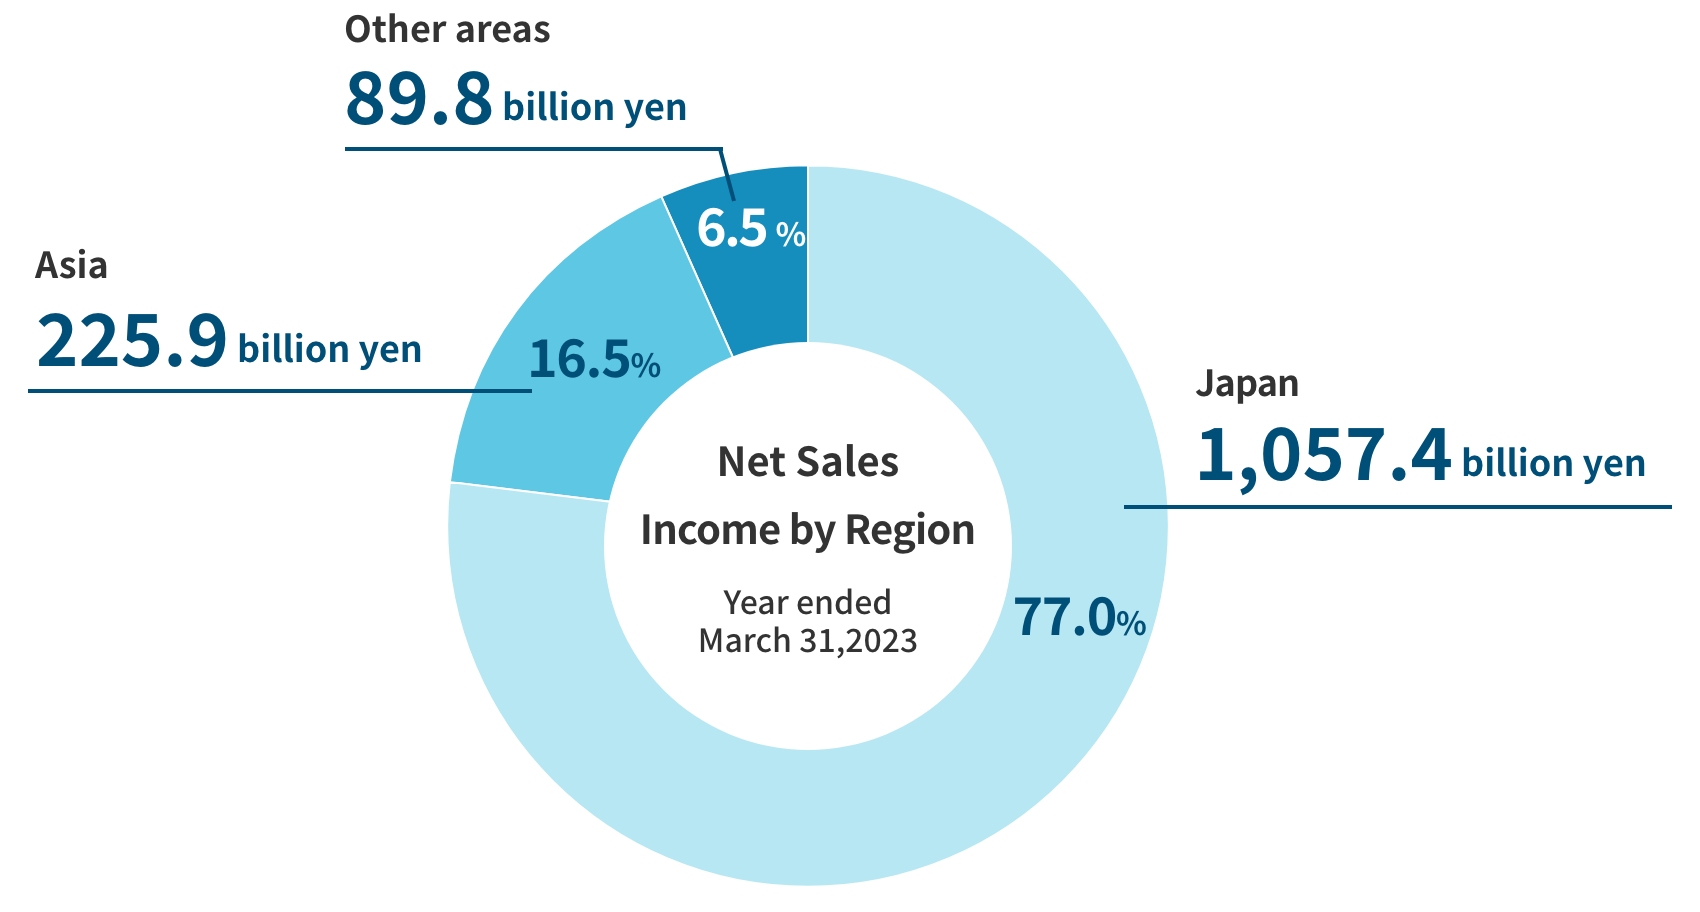 Pie chart showing net sales income by region for fiscal year ended March 2023. Japan account for 77.0% of total sales at 1,057.4 billion yen, Asia account for 16.5% at 225.9 billion yen, and other areas account for 6.5% at 89.8 billion yen.